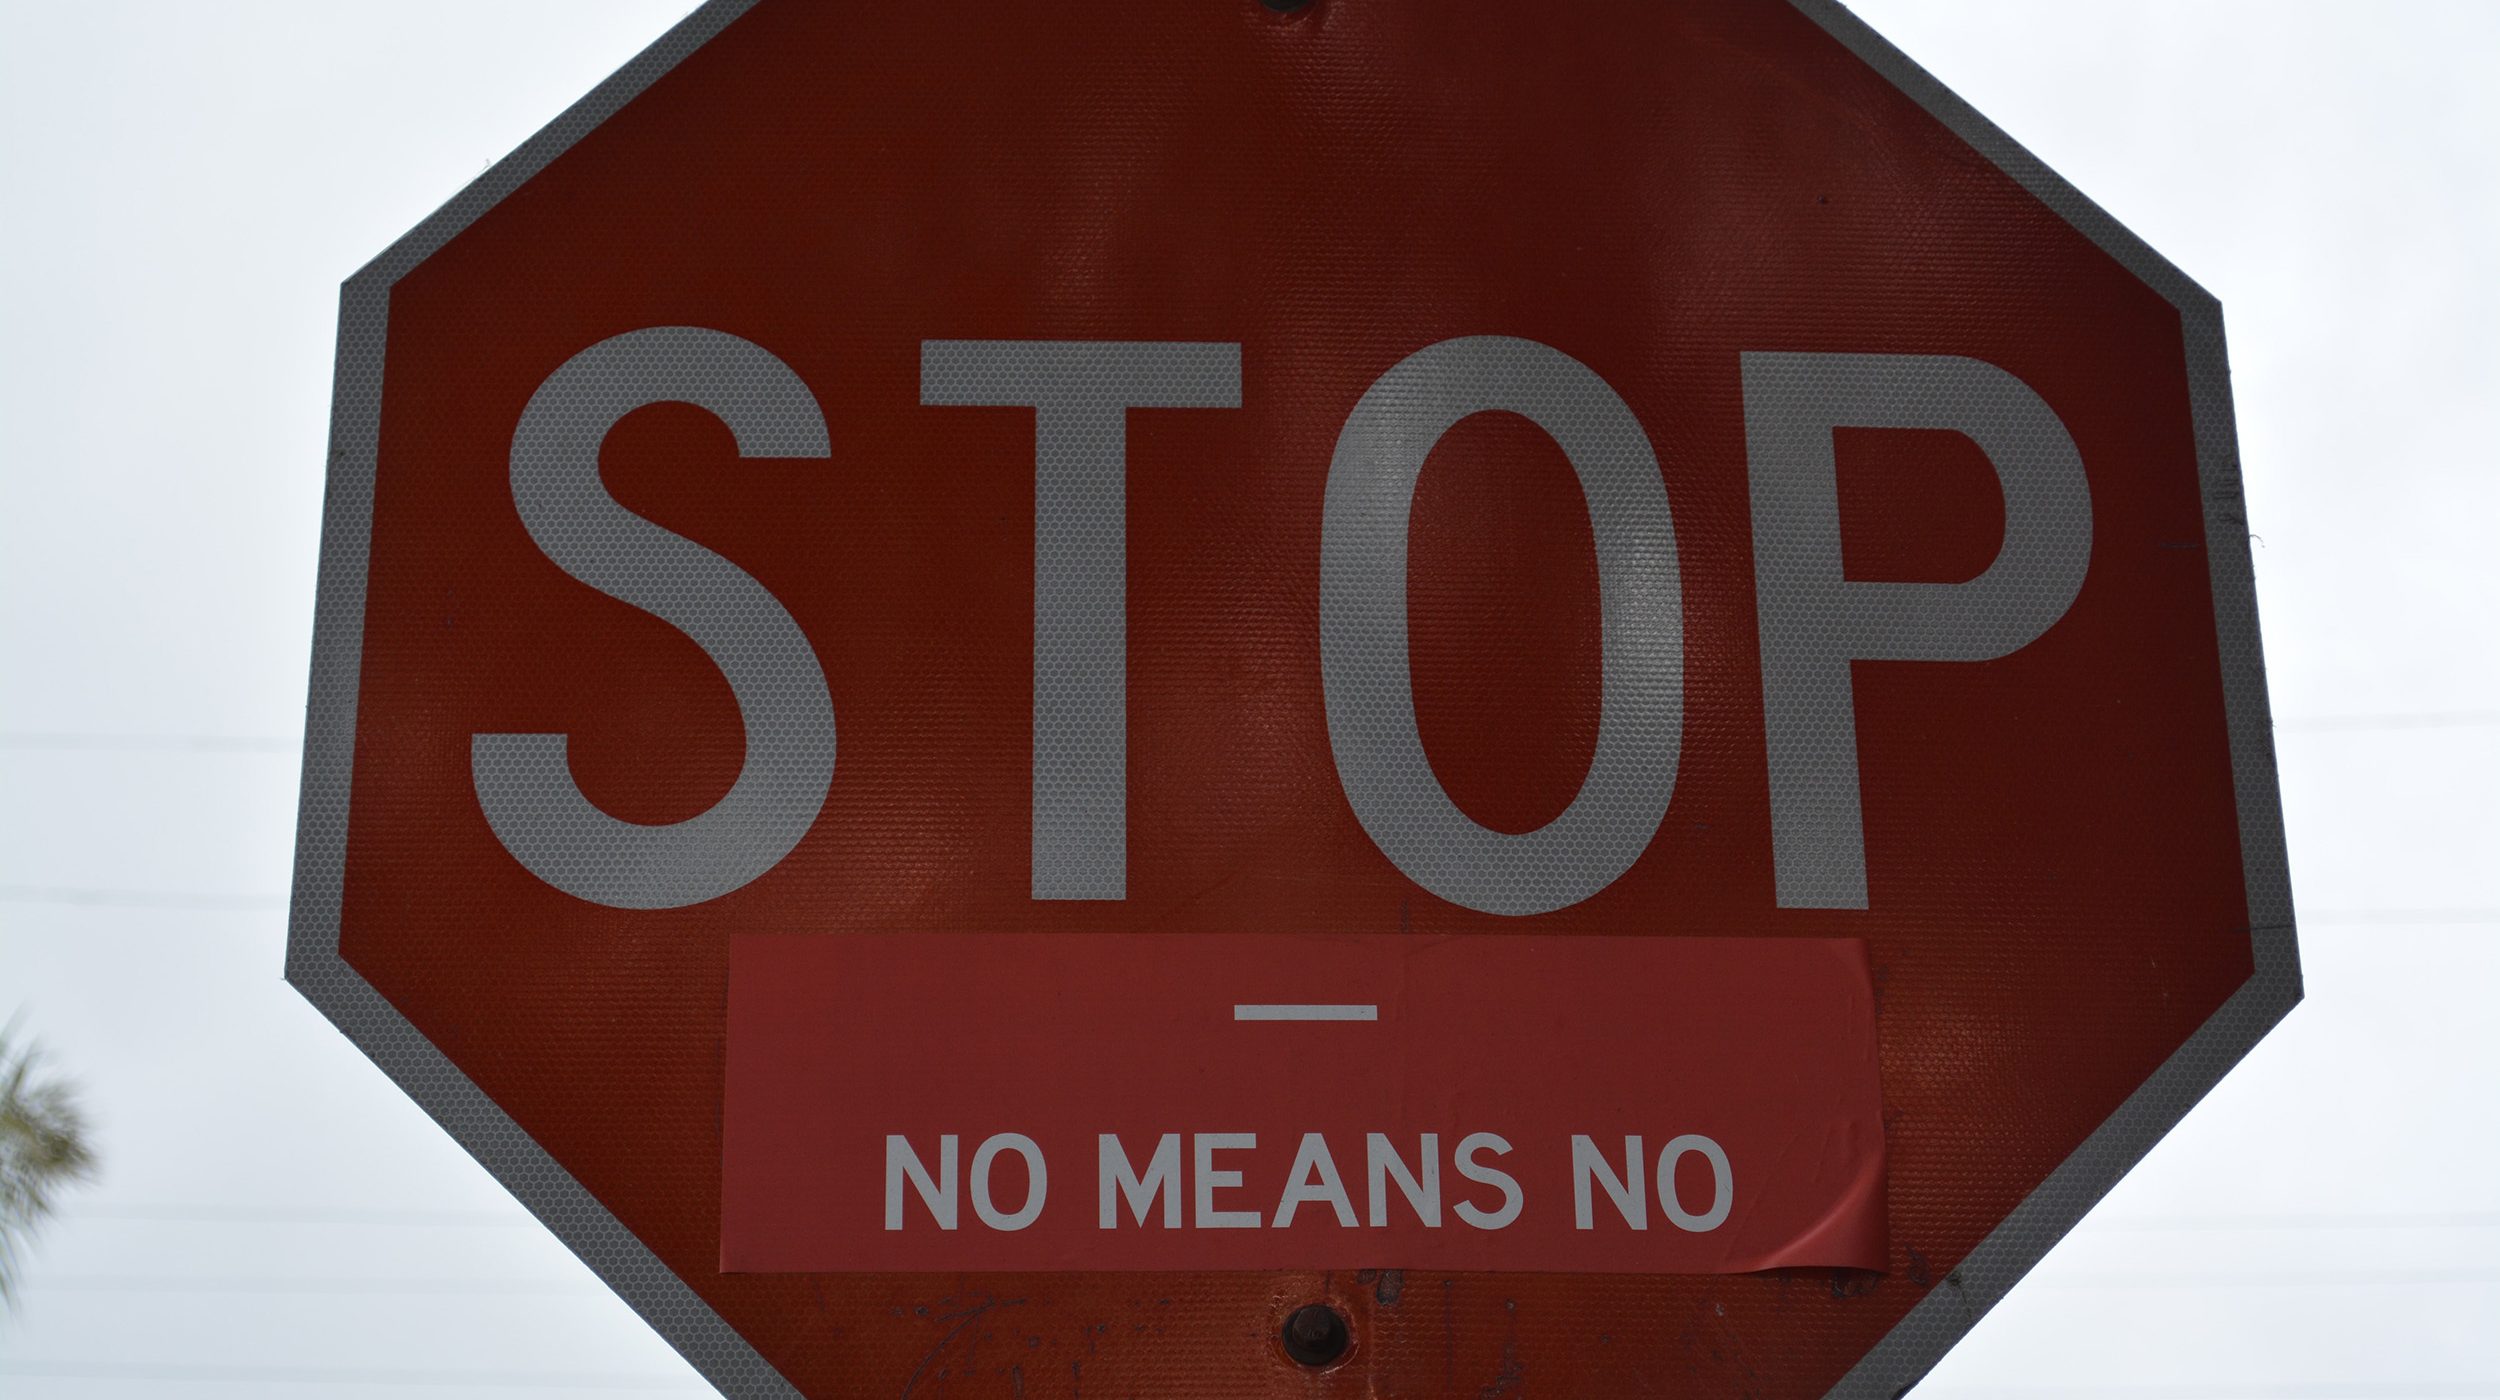 stop sign with additional label that reads 'No means no' (link to file)